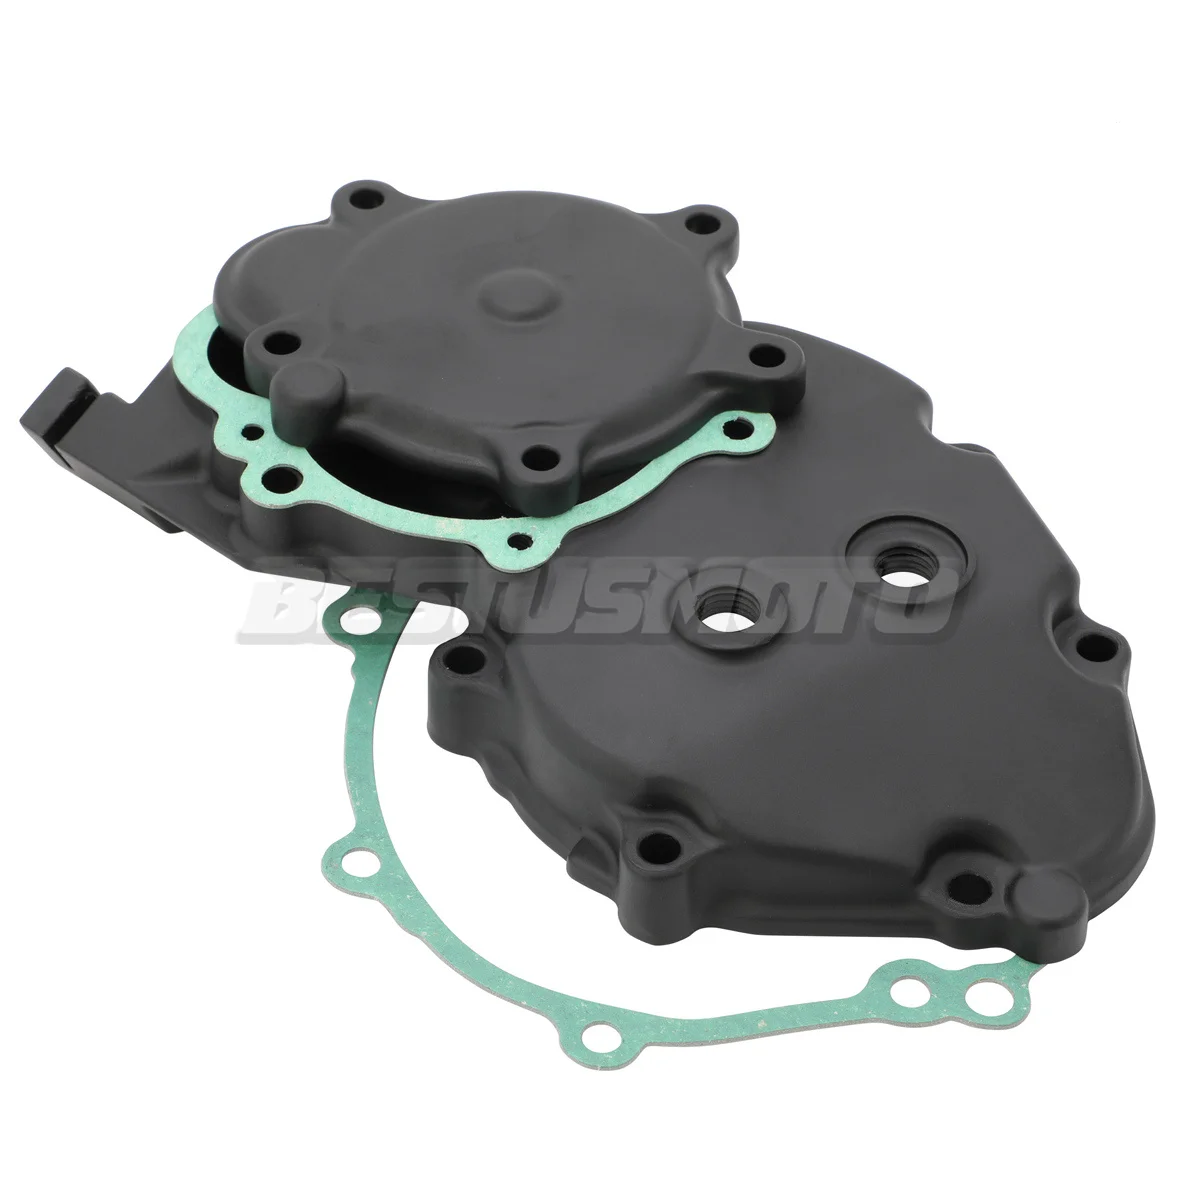 Motorcycle Right Stator Engine Cover Crankcase with Gasket For Kawasaki Ninja ZX10R ZX-10R ZX 10R 2006 2007